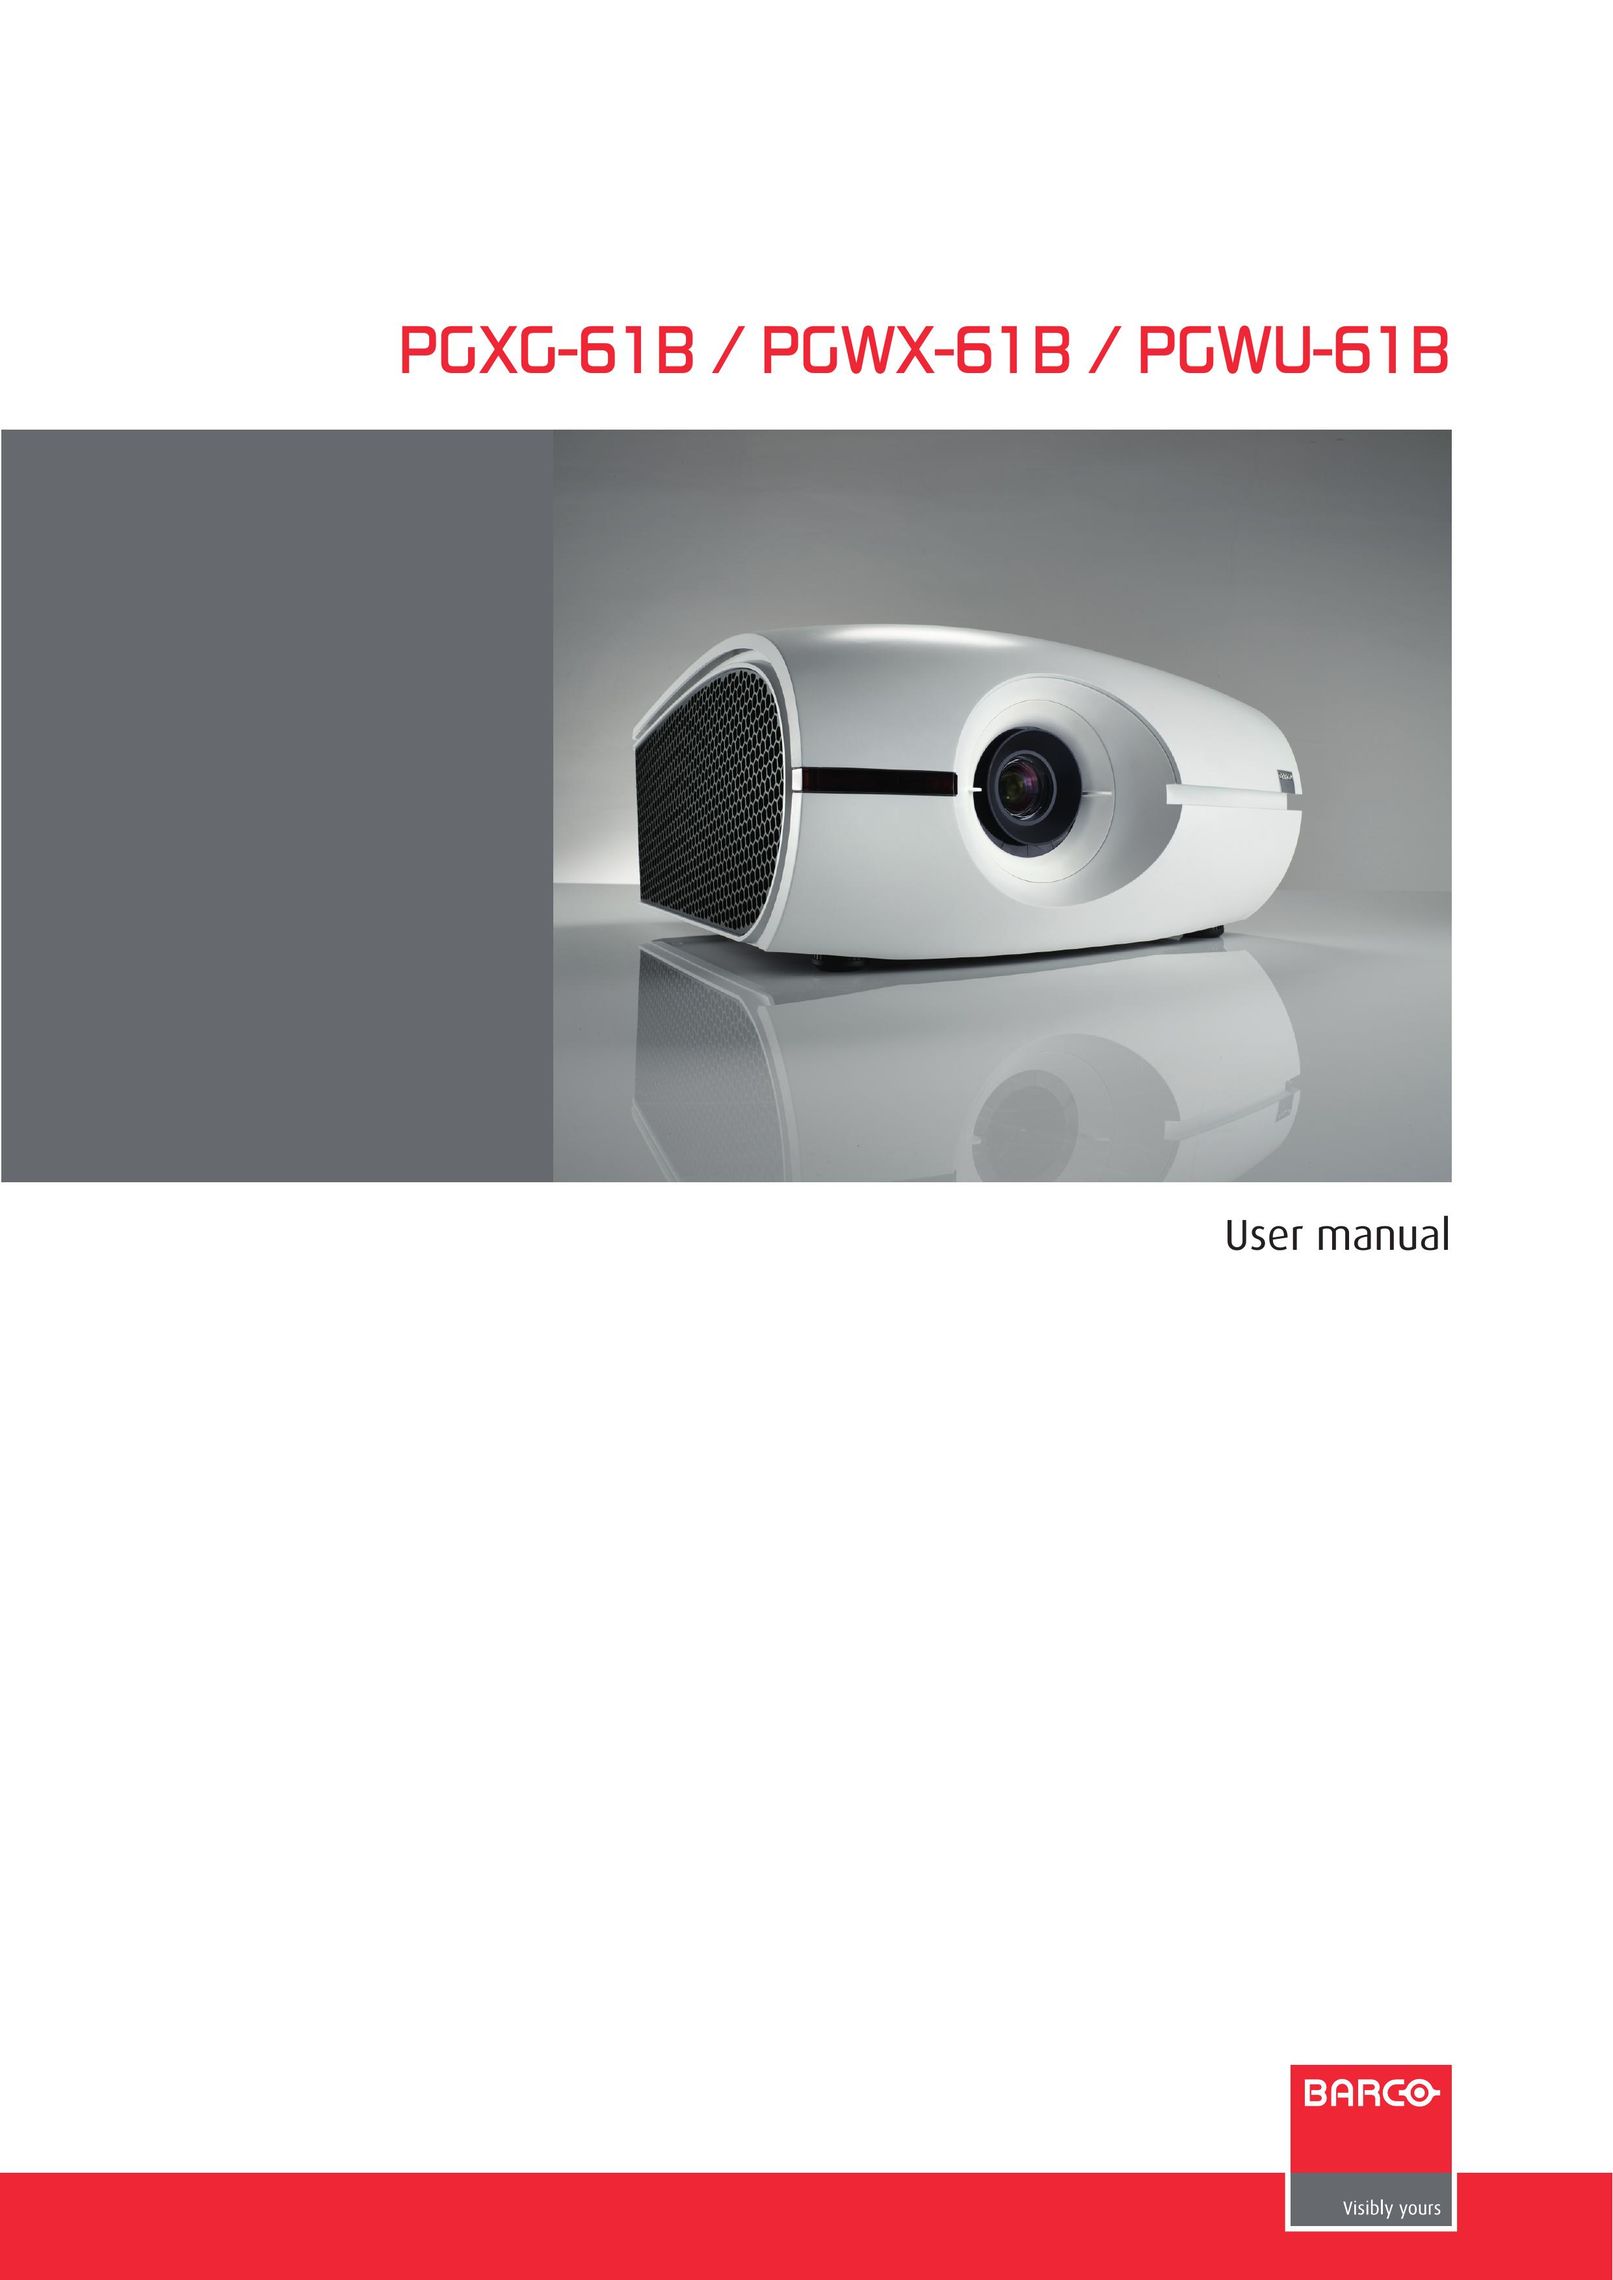 Barco PGWU-61B Projection Television User Manual